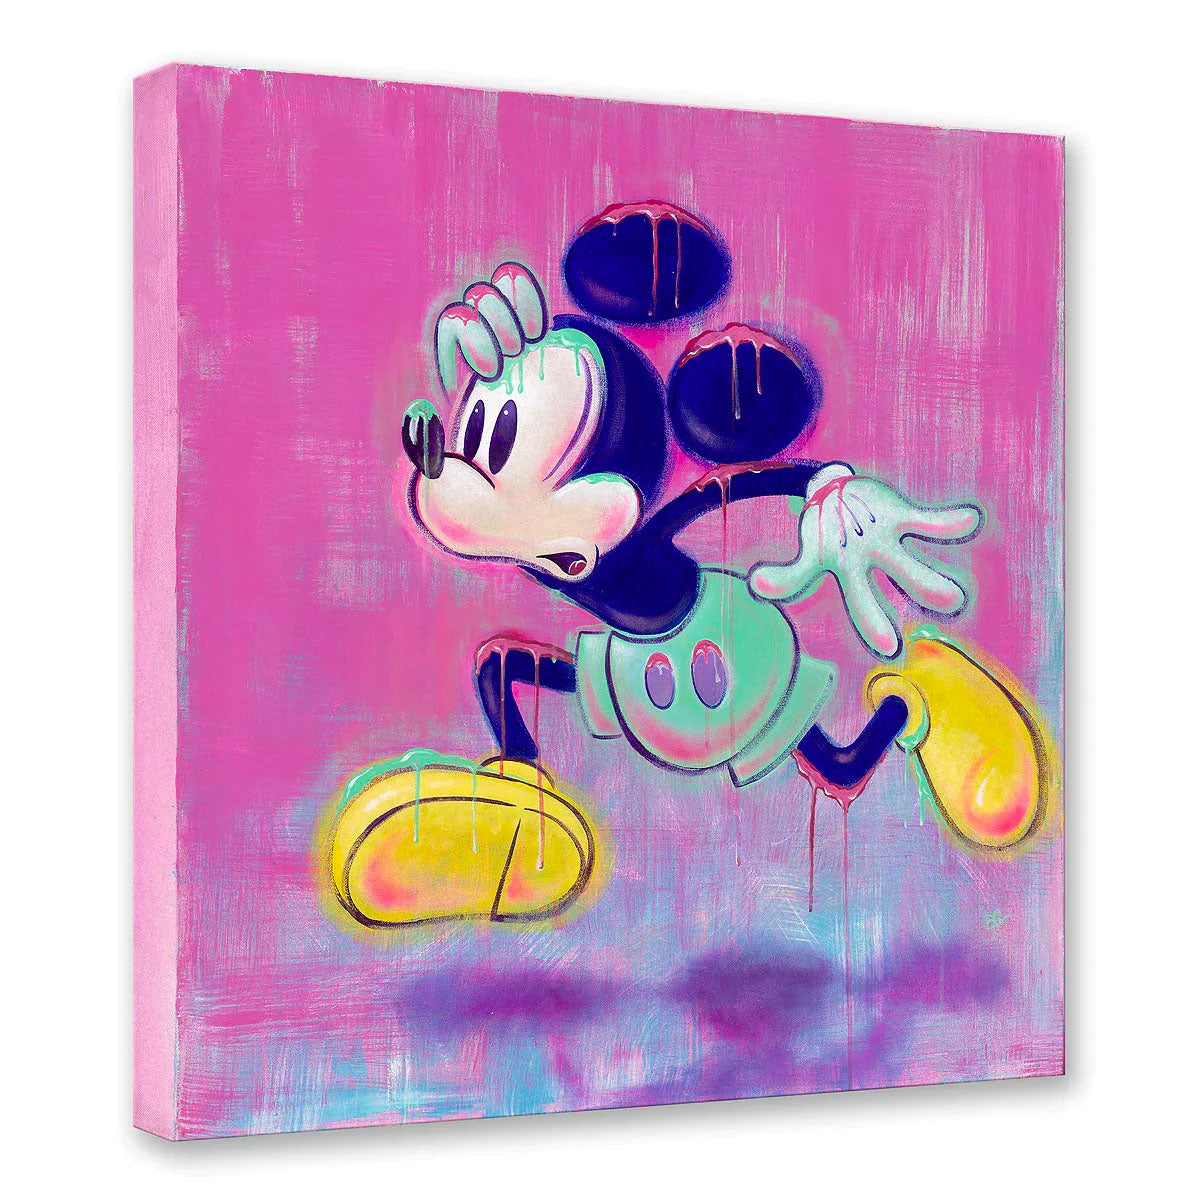 Dom Corona Disney "What's Burning?" Limited Edition Canvas Giclee